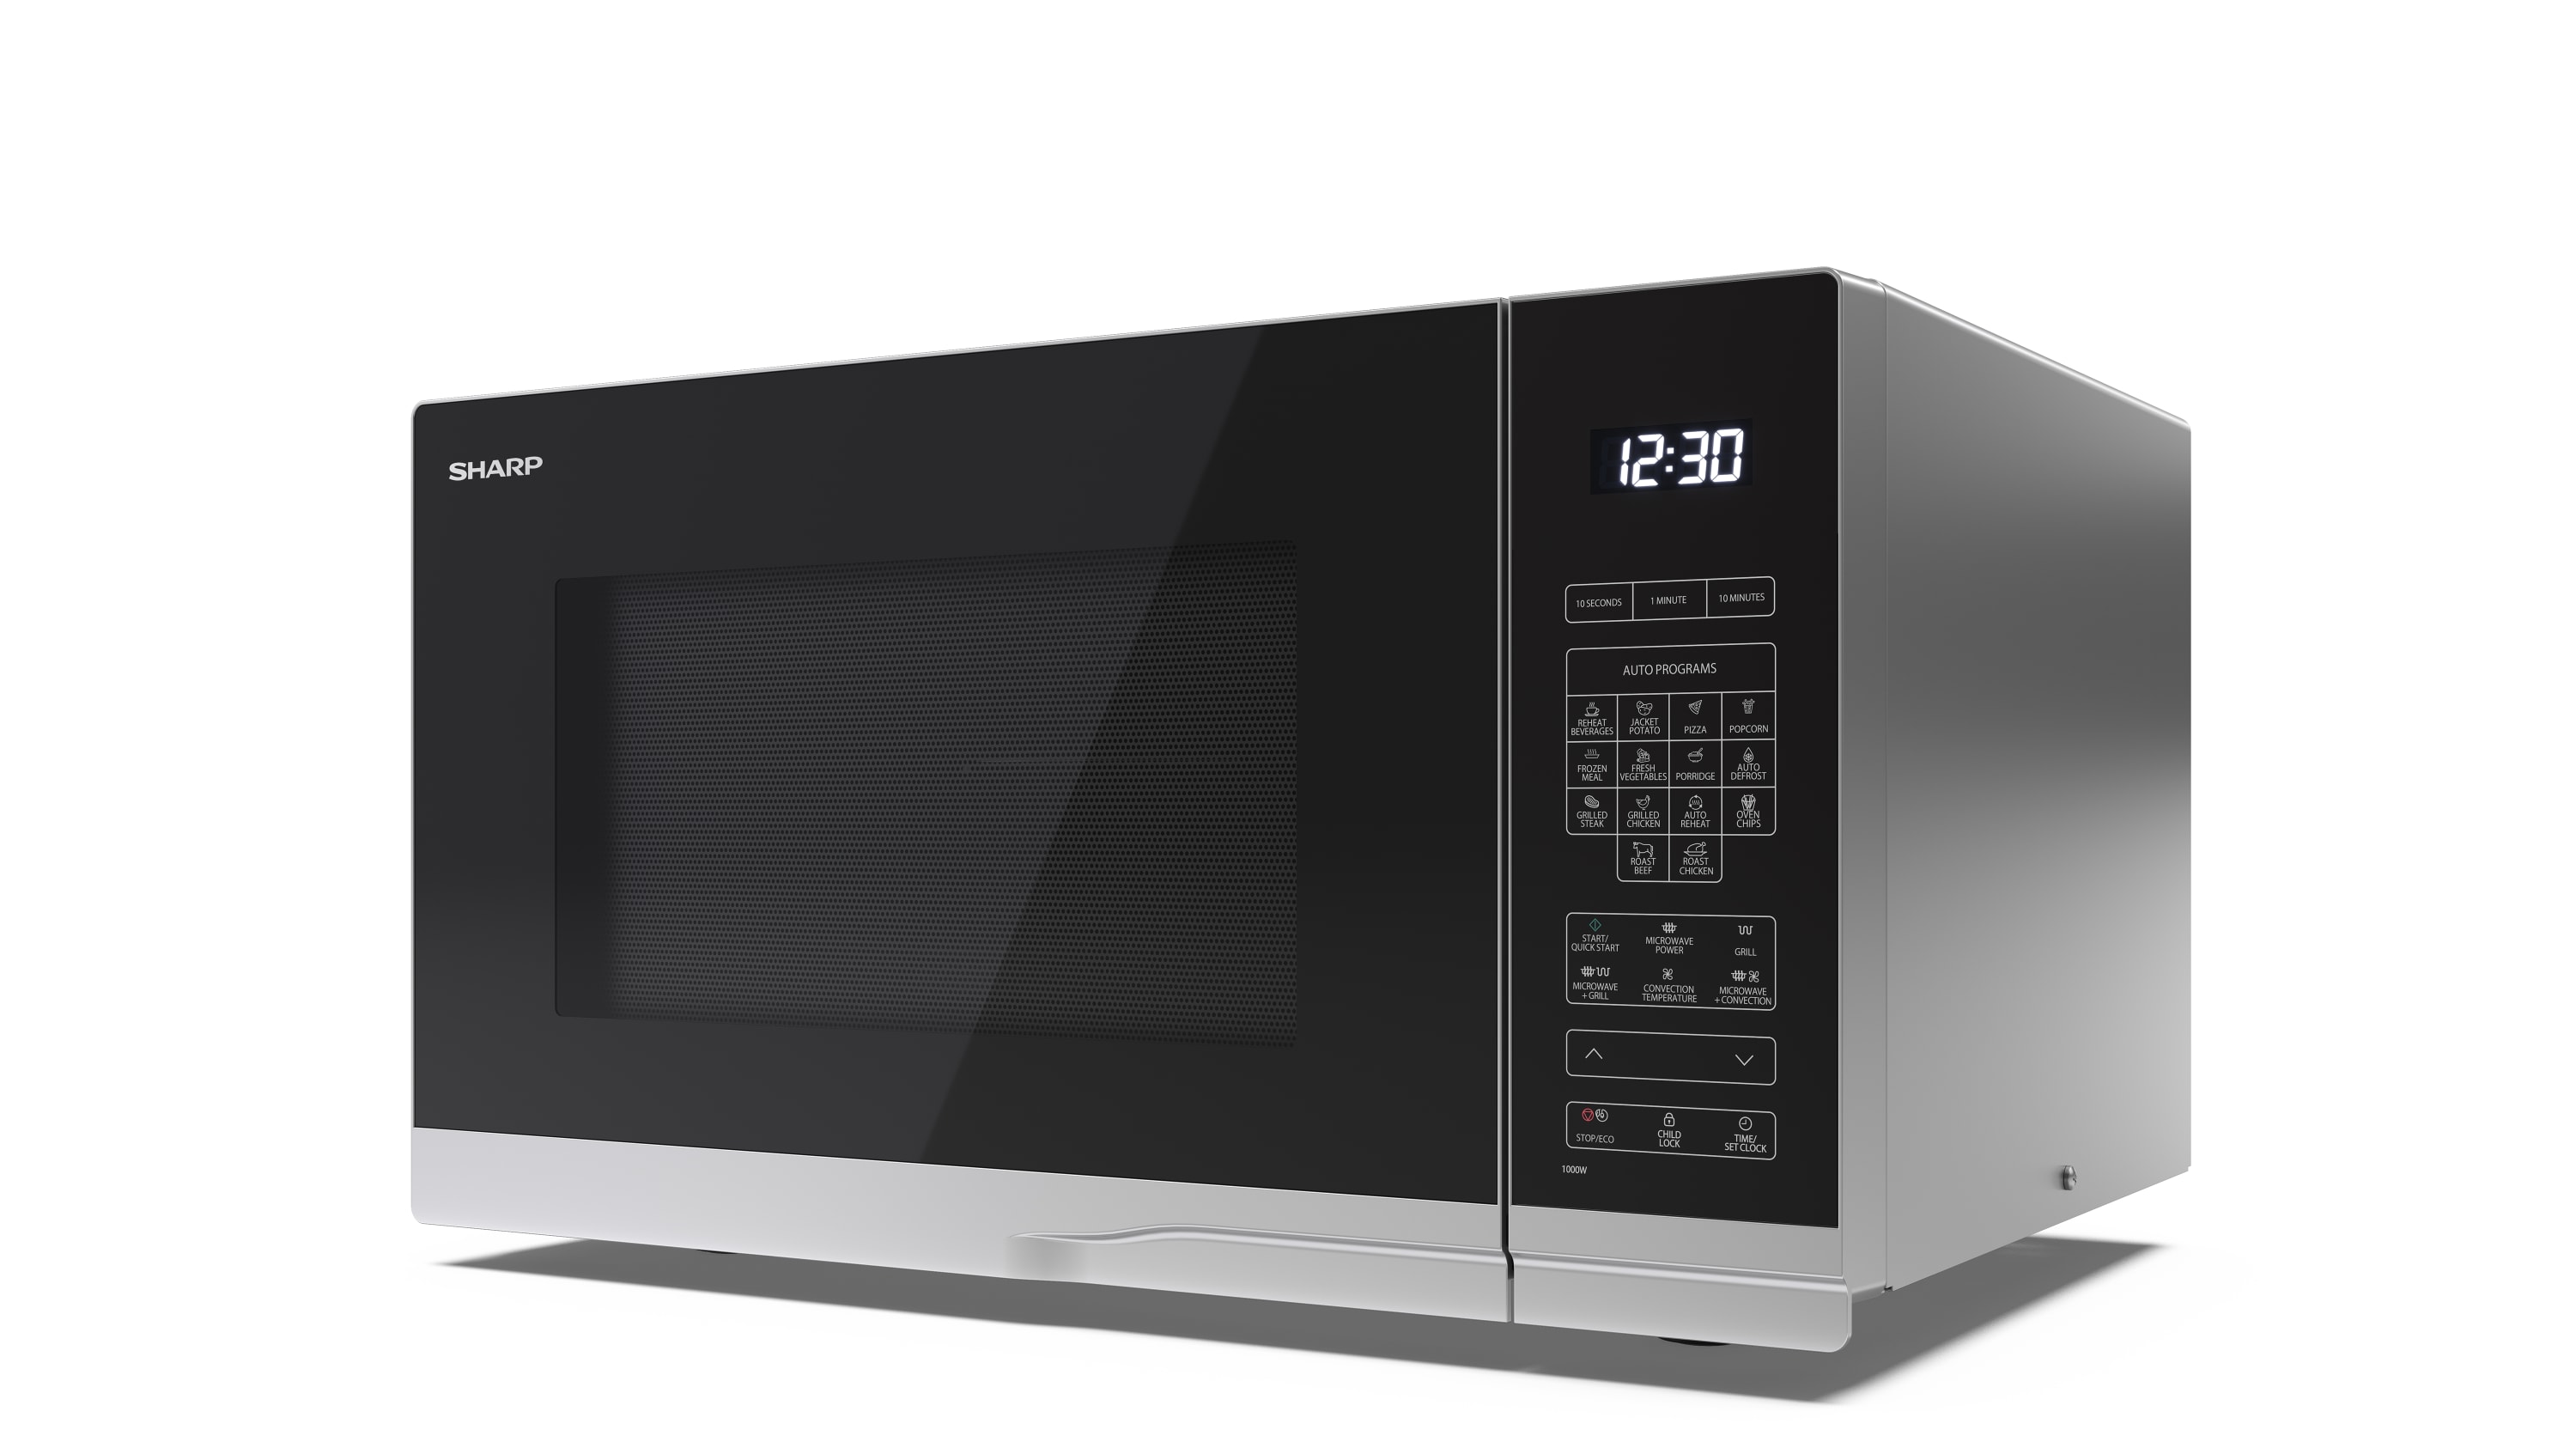 32 Litre Microwave Oven with Grill and Convection - YC-PC322AU-S